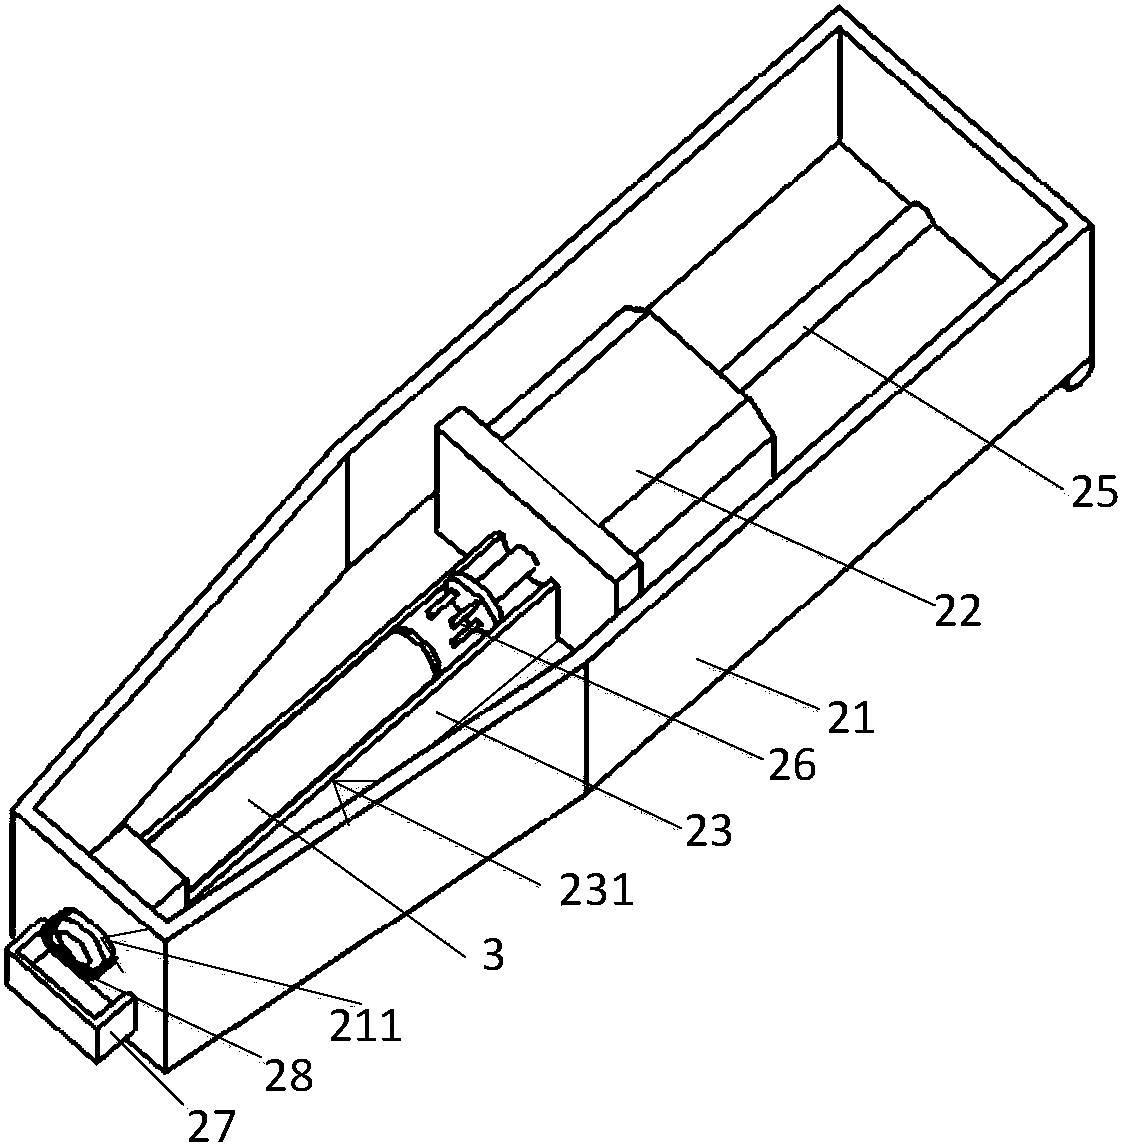 Automatic moxa stick extending device